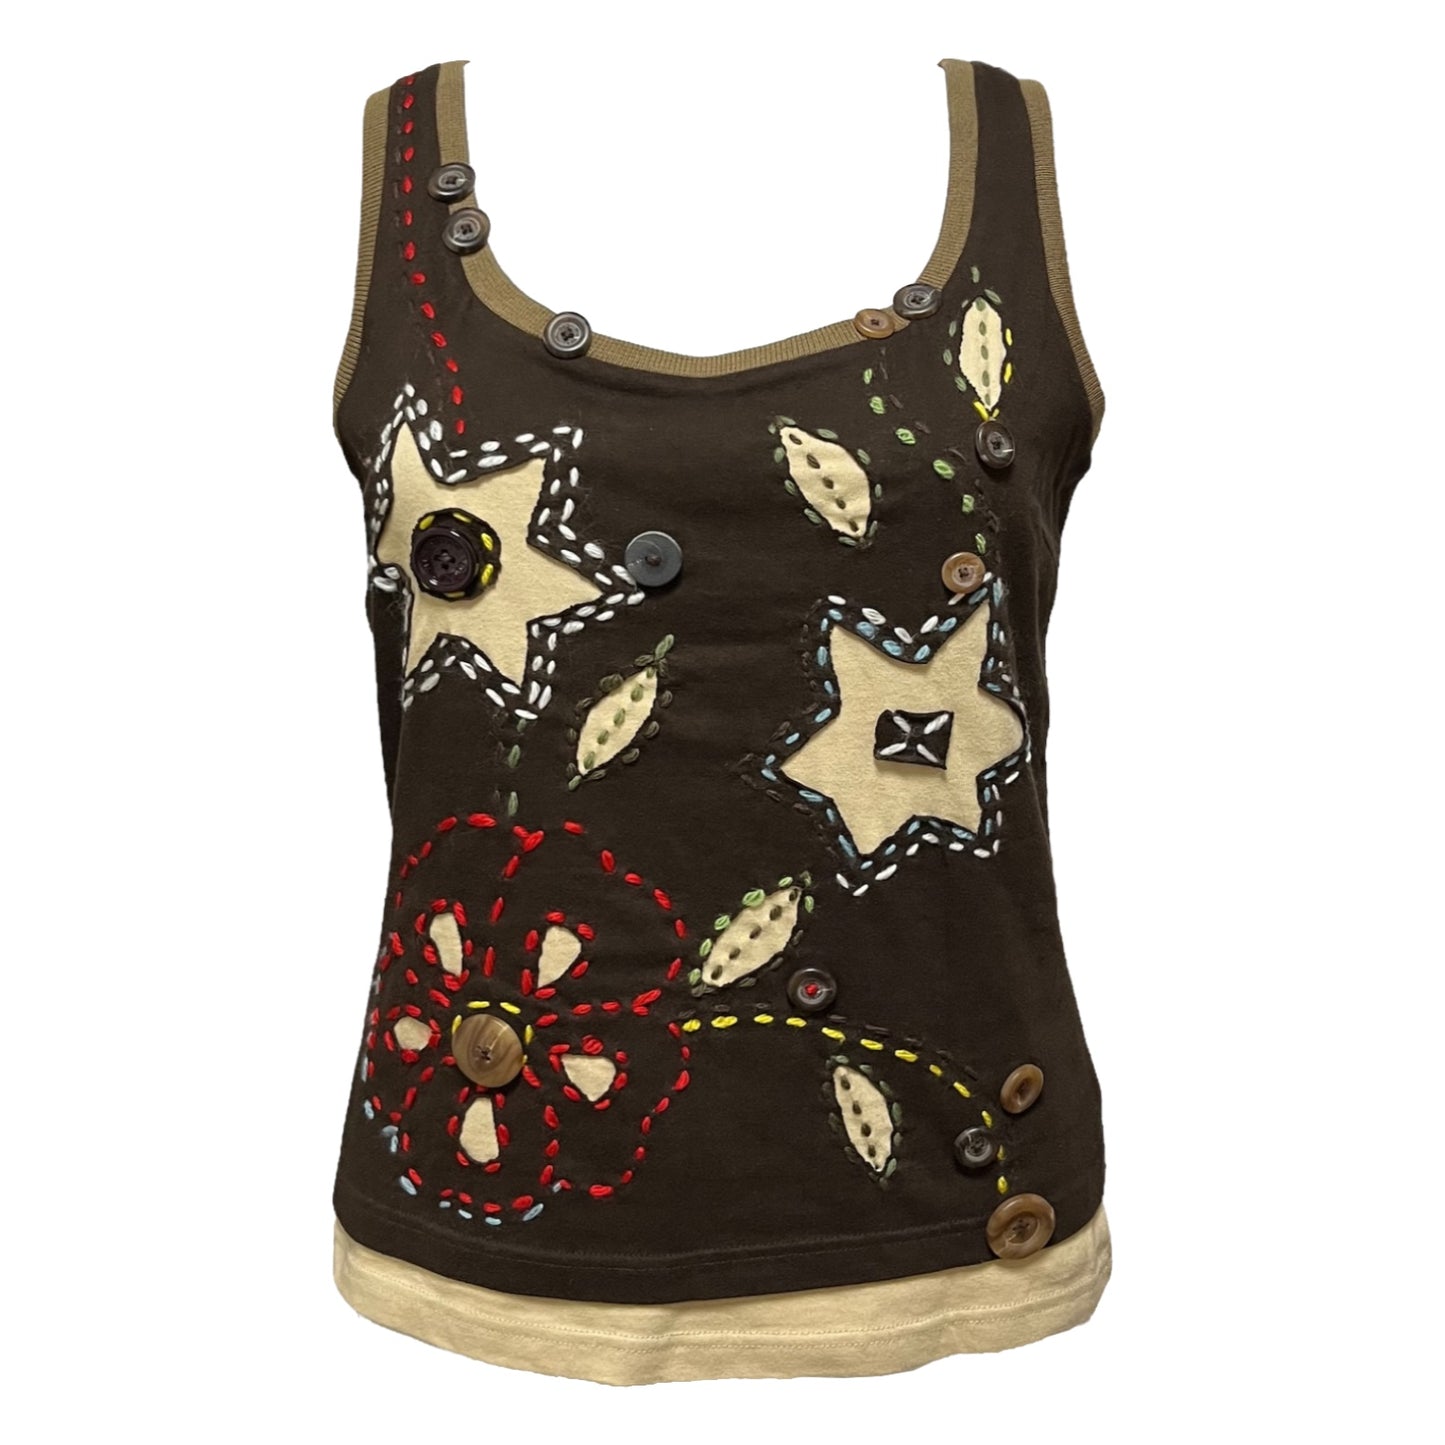 D&G 2002 Fall Winter Embroidered Floral Tank Top